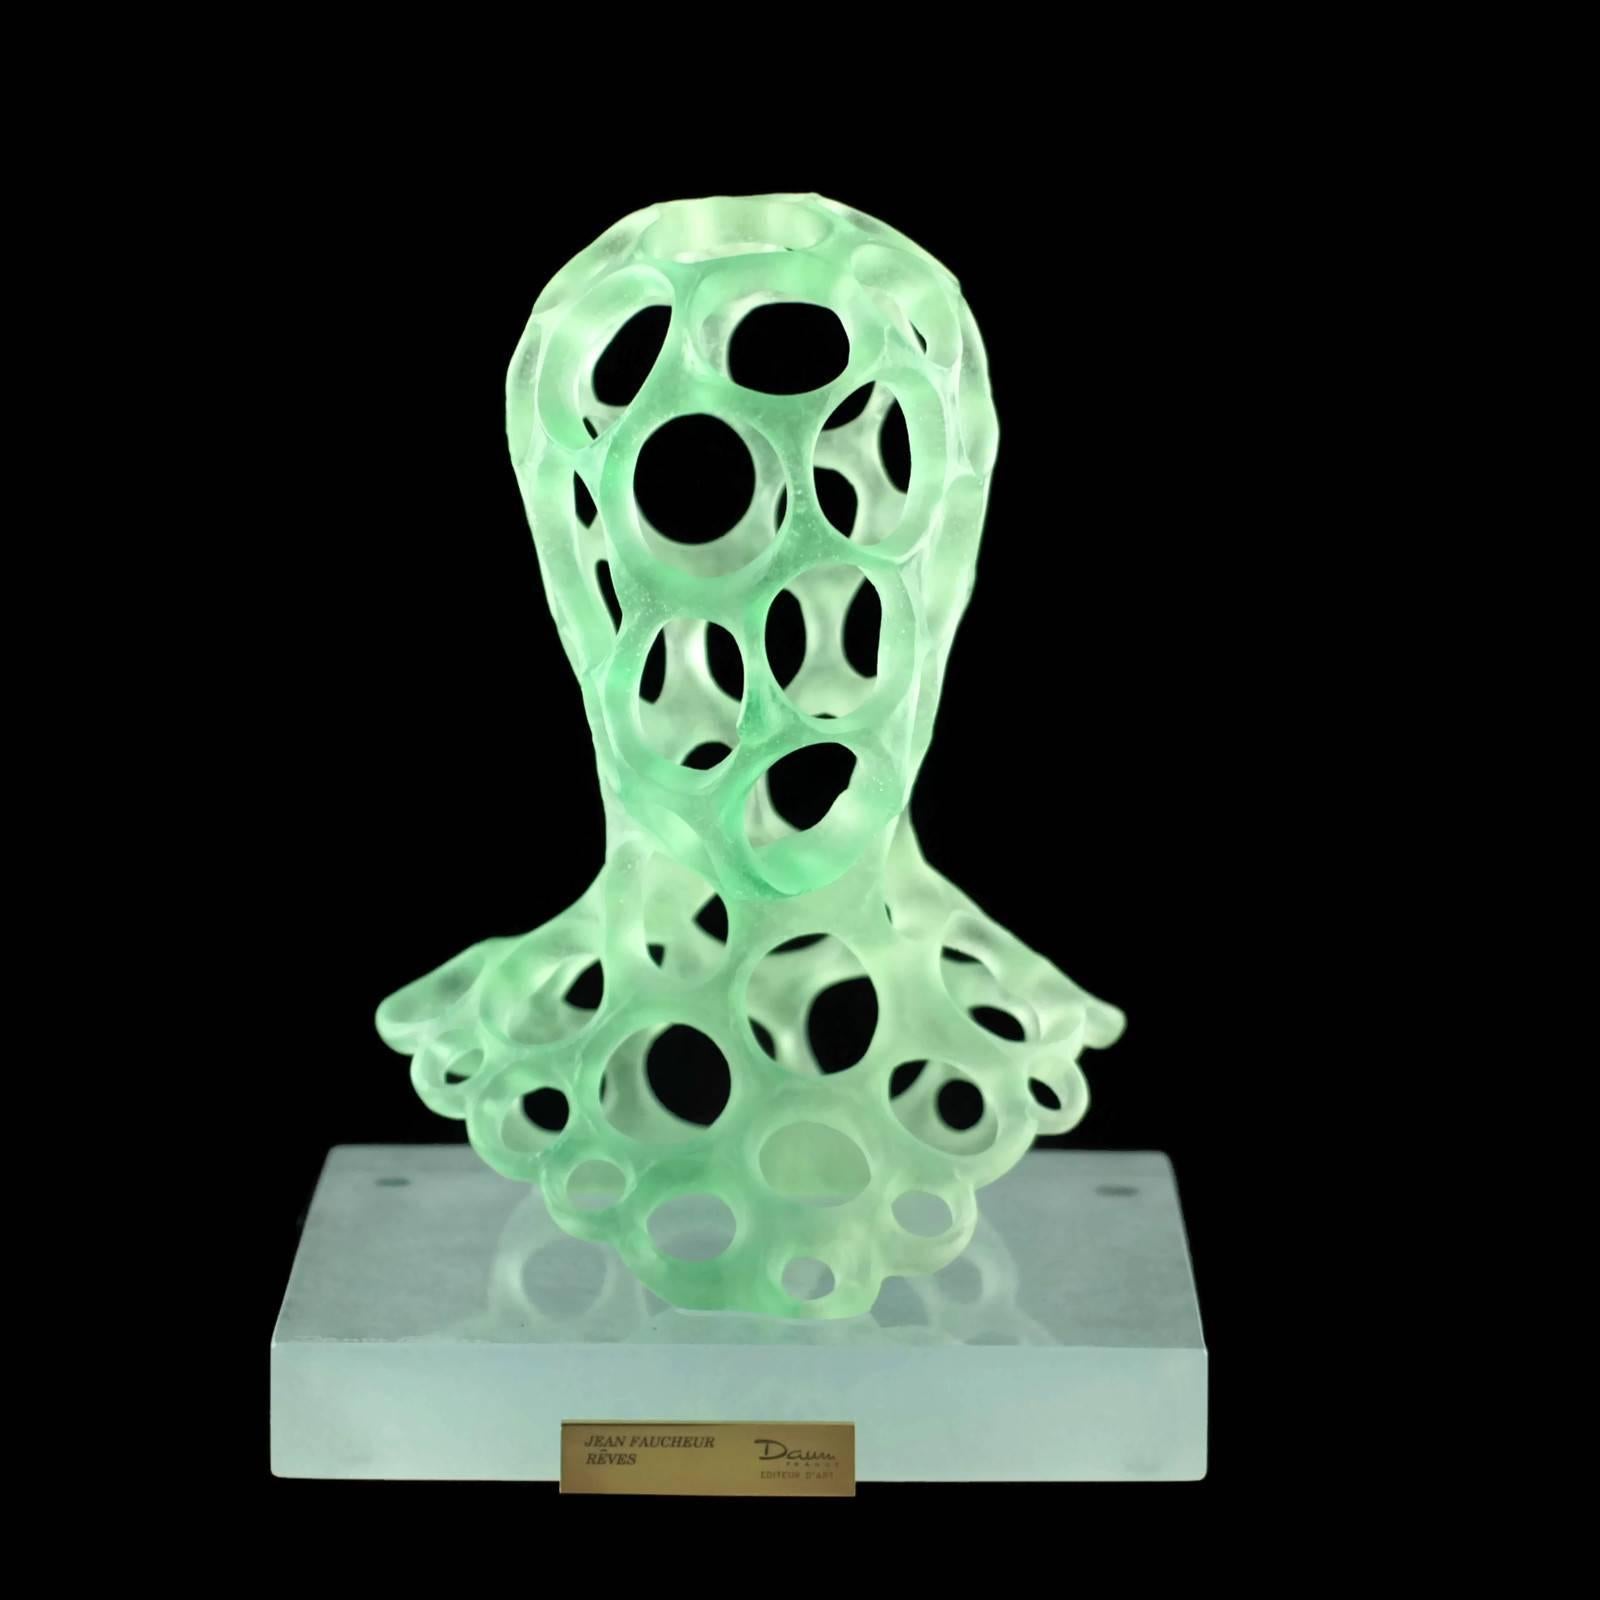 This signed and numbered limited edition pâte de verre sculpture was designed for Daum by French artist Jean Faucheur (b. 1956). The piece is titled Rêves - translated as Dreams - and depicts a stylized human head executed in translucent green pâte